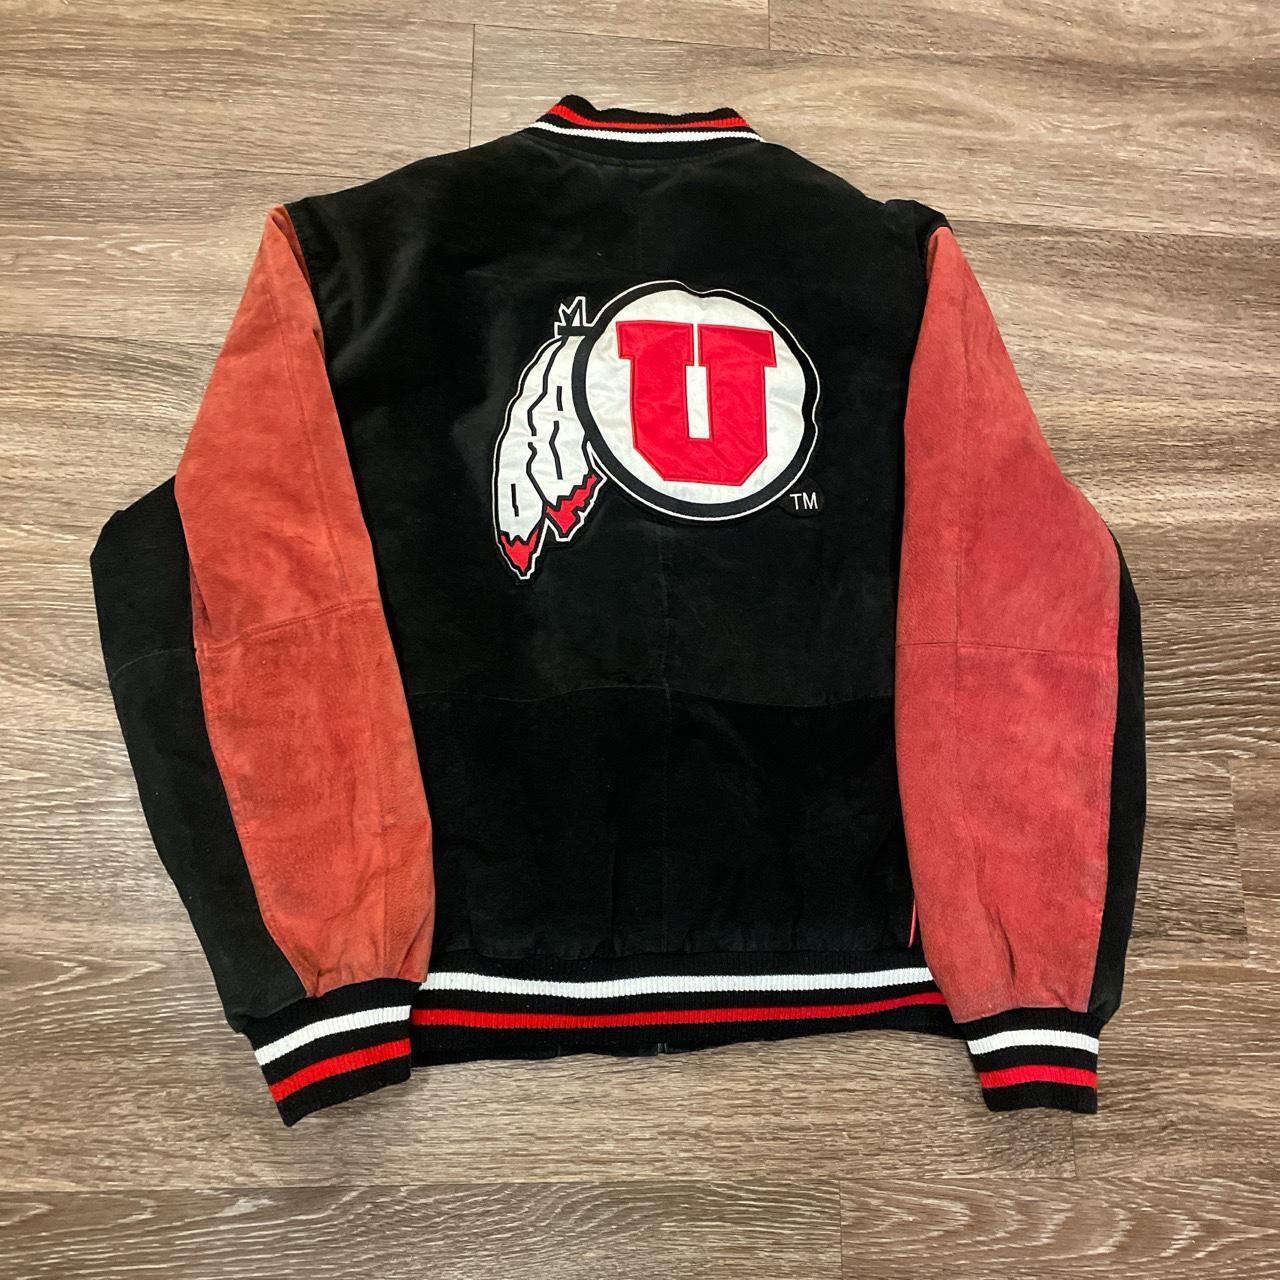 Utah Utes leather jacket, size 2XL. Some dirt on the... - Depop